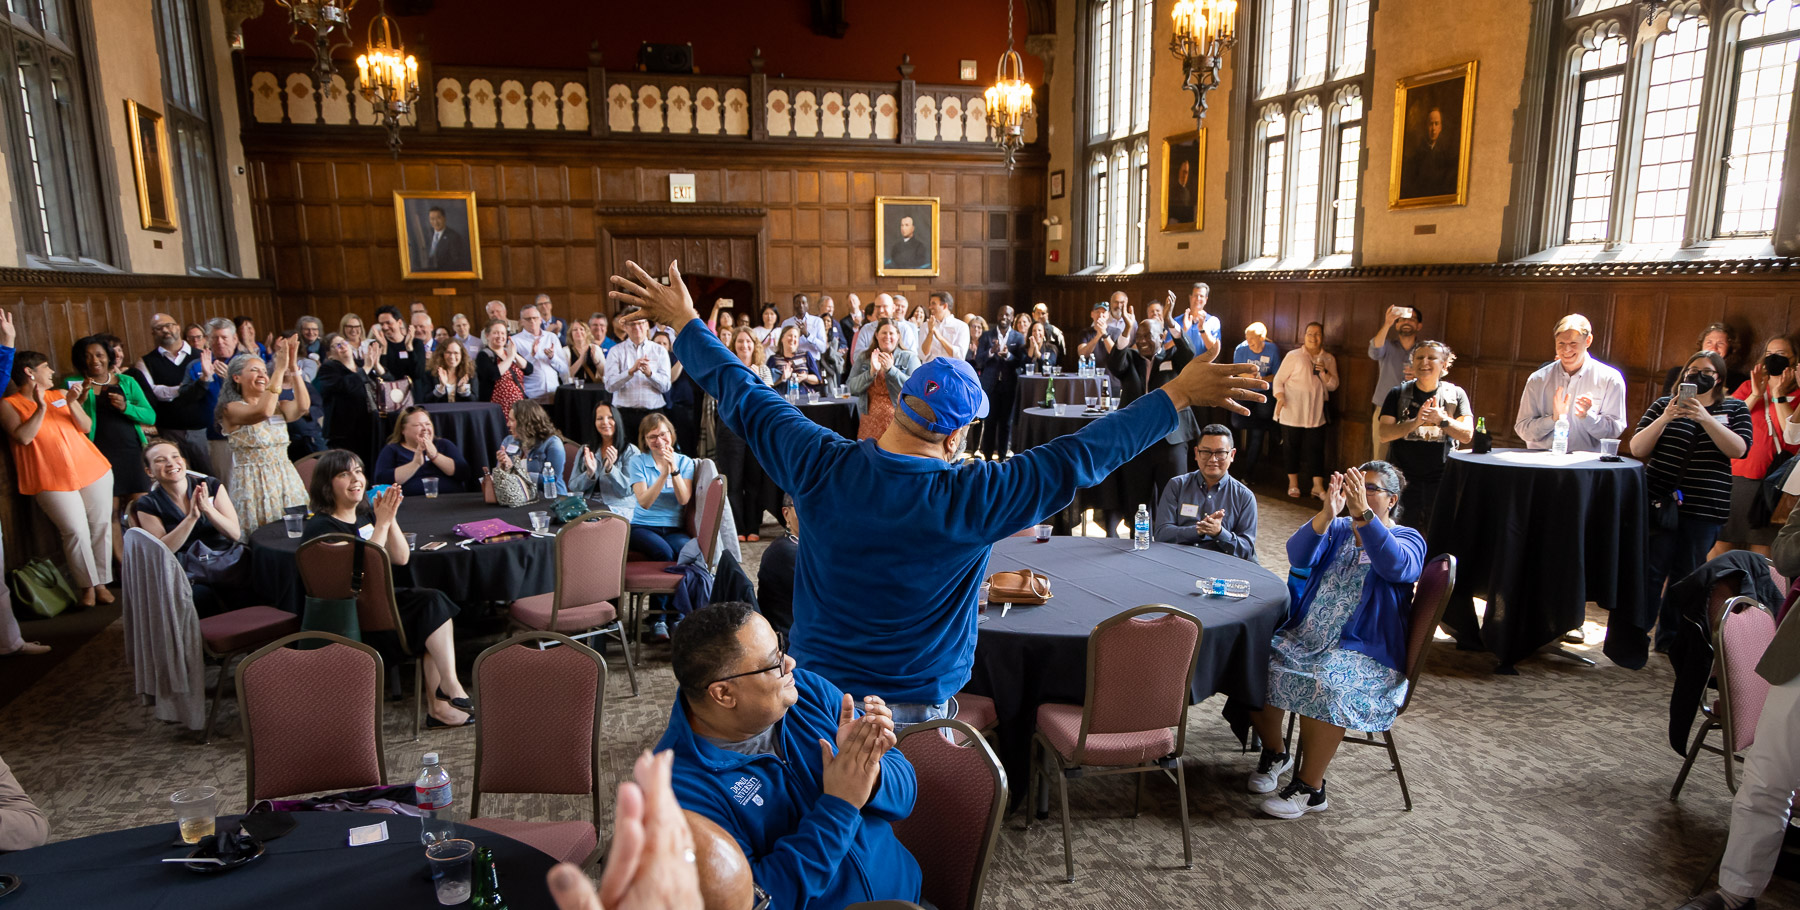 A bittersweet farewell to DePaul colleagues as they begin a new chapter